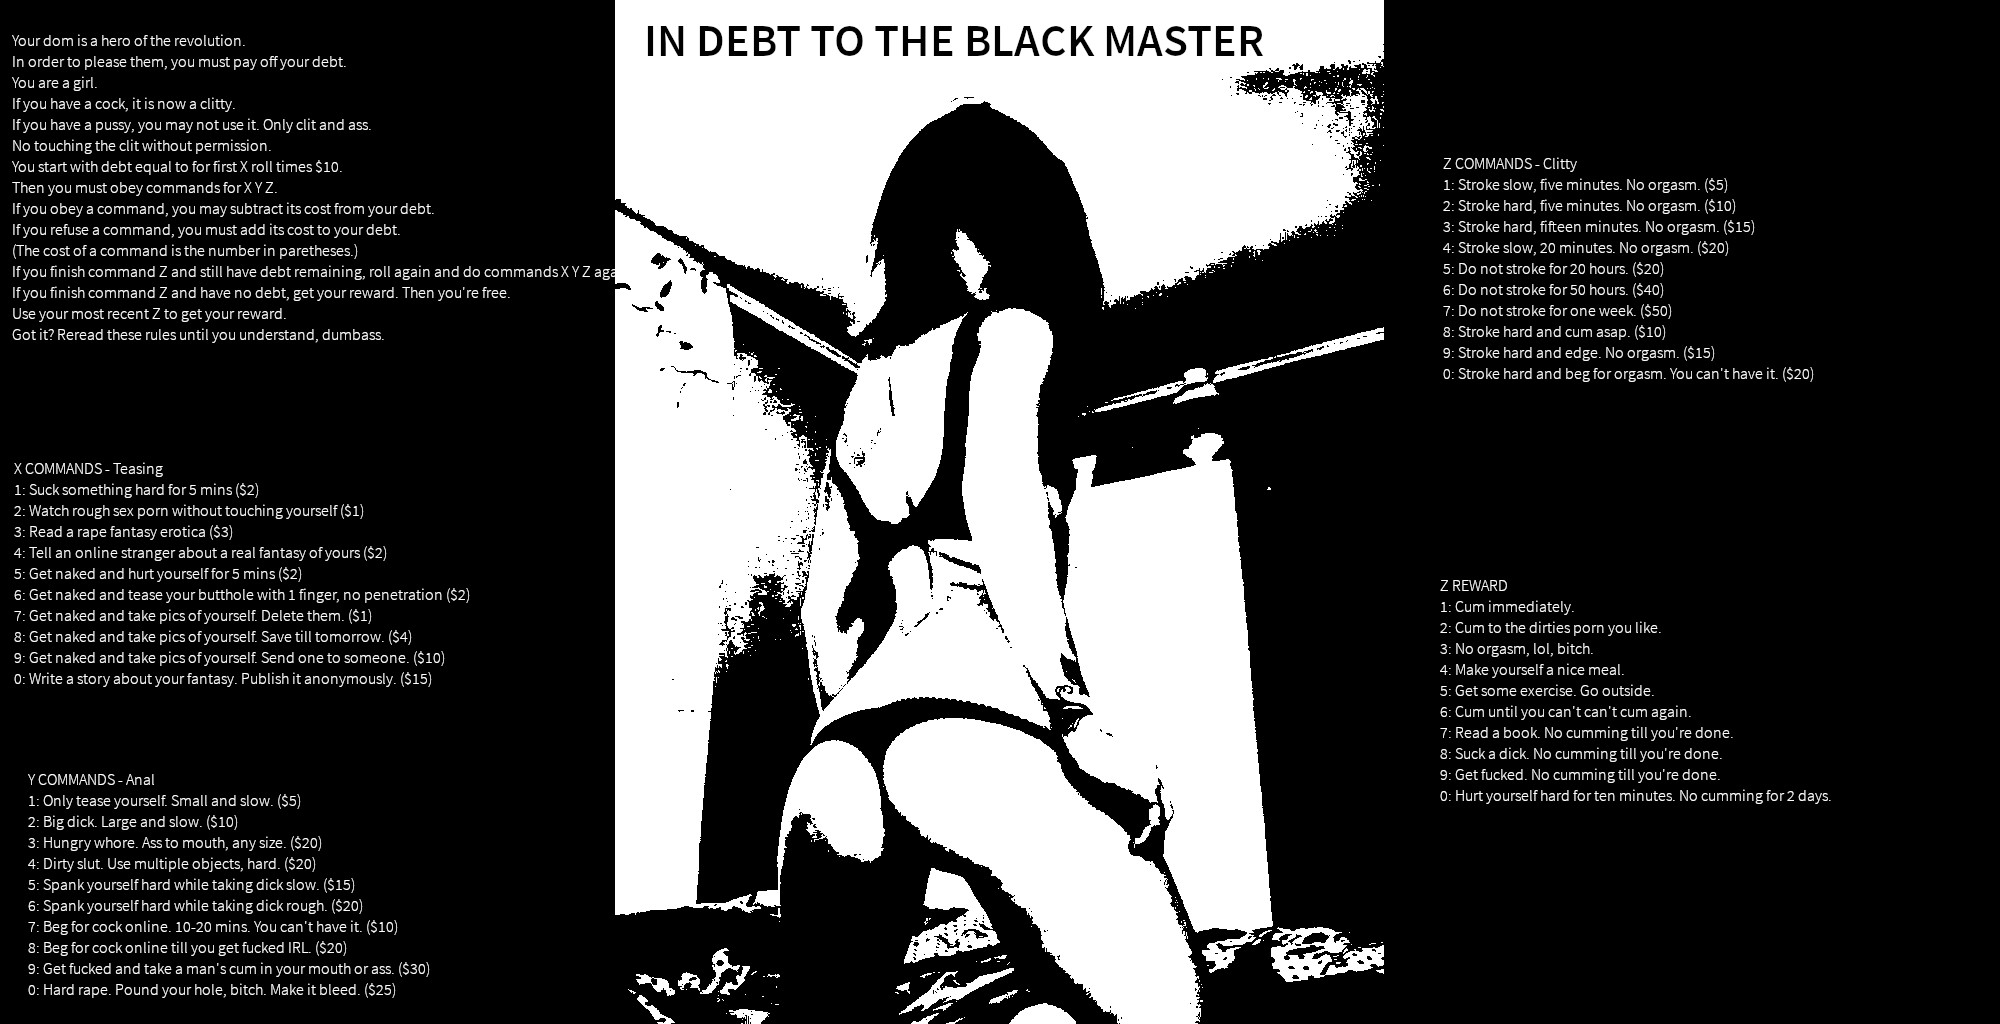 In debt to the black master pic